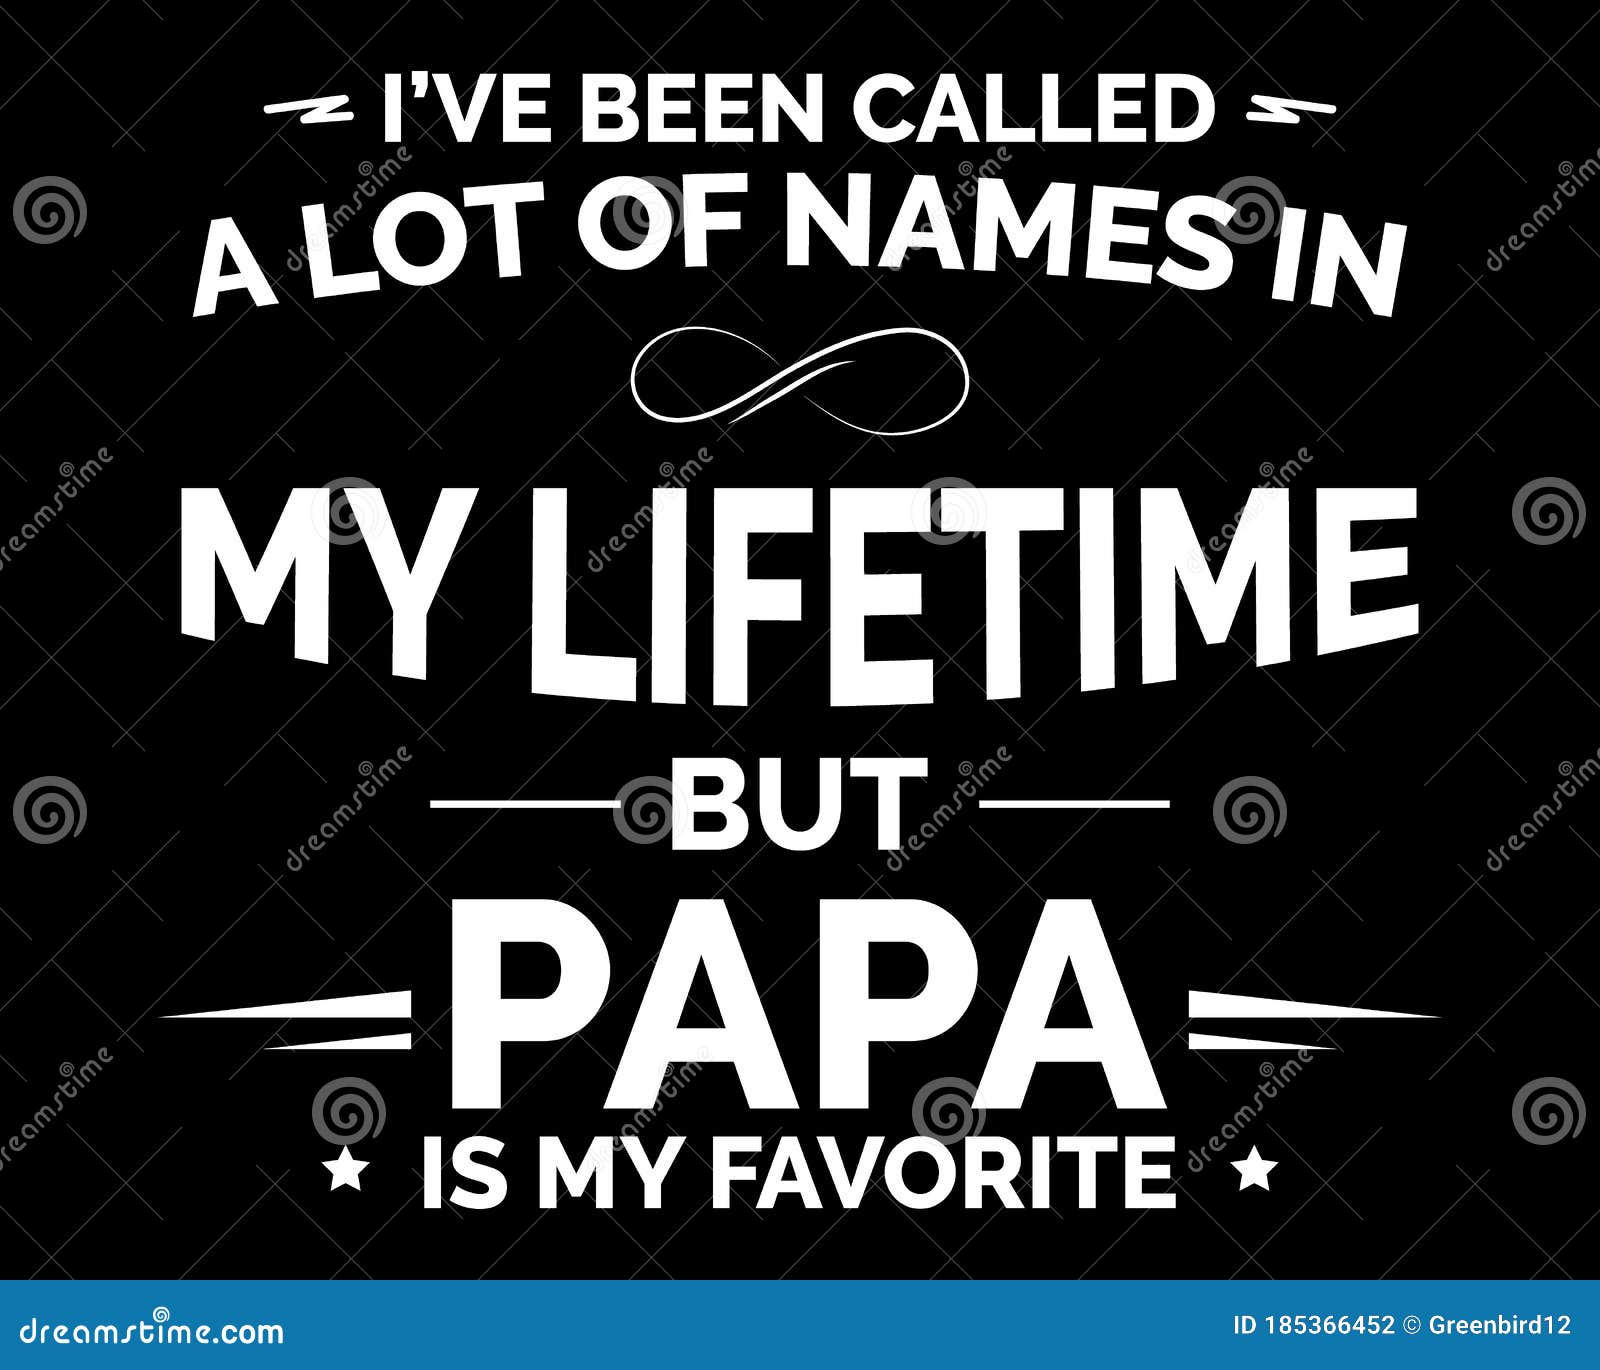 but papa is my favorite / beautiful text tshirt  poster   art